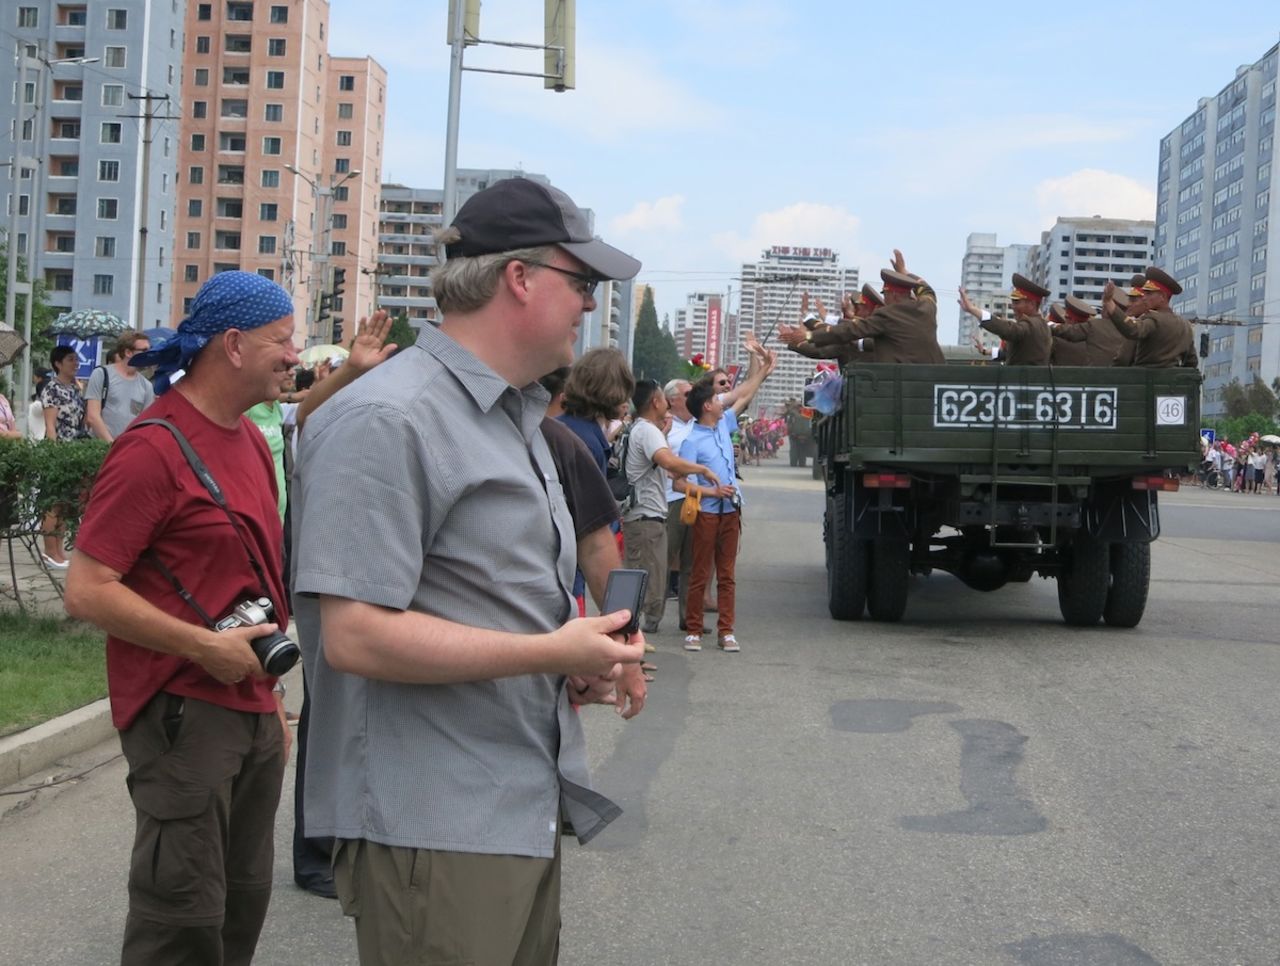 This year's Victory Day, on July 2, attracted a lot of Western tourists. The highlight of the tour was watching the military parade of tanks, troops and missiles. Many tourists got caught up in the spirit of the event, high-fiving soldiers as they drove past. 